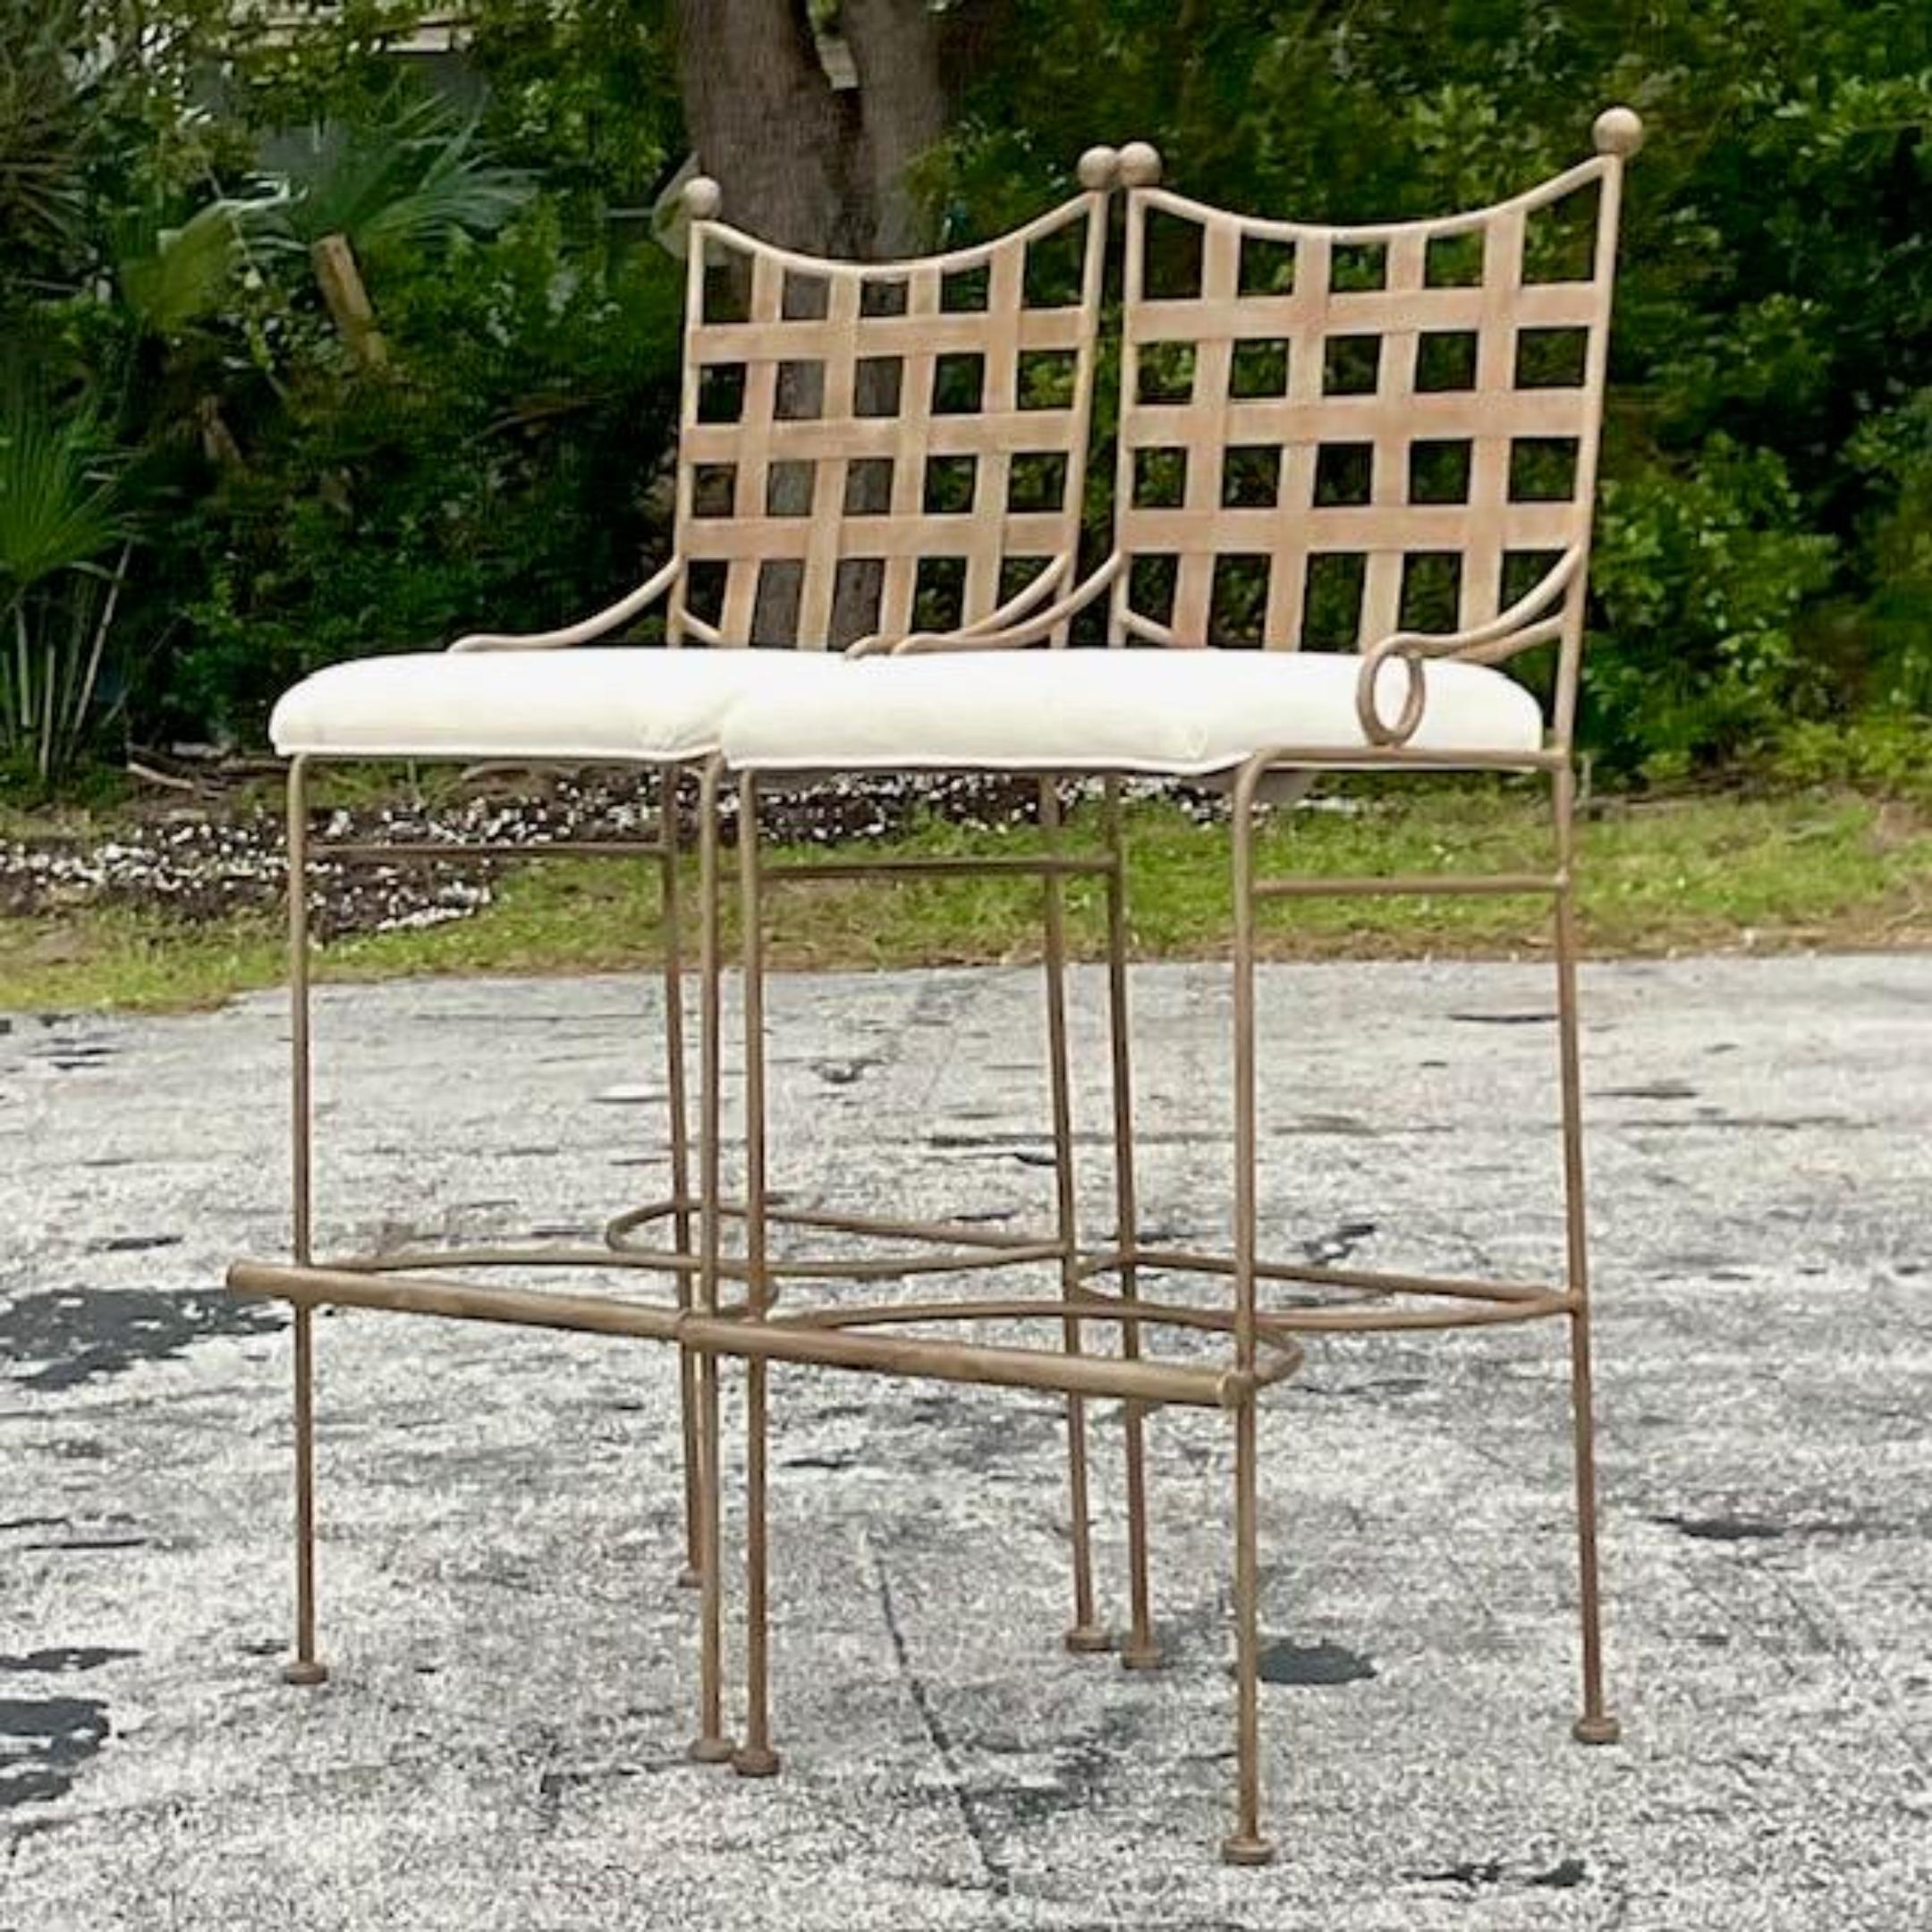 A fabulous pair of vintage Coastal outdoor bar stools. Made by the iconic Kessler group and tagged under the seat. Perfect outdoors or indoors. You decide! Coordinating table and chairs also available on my Chairish page. Acquired from a Palm Beach